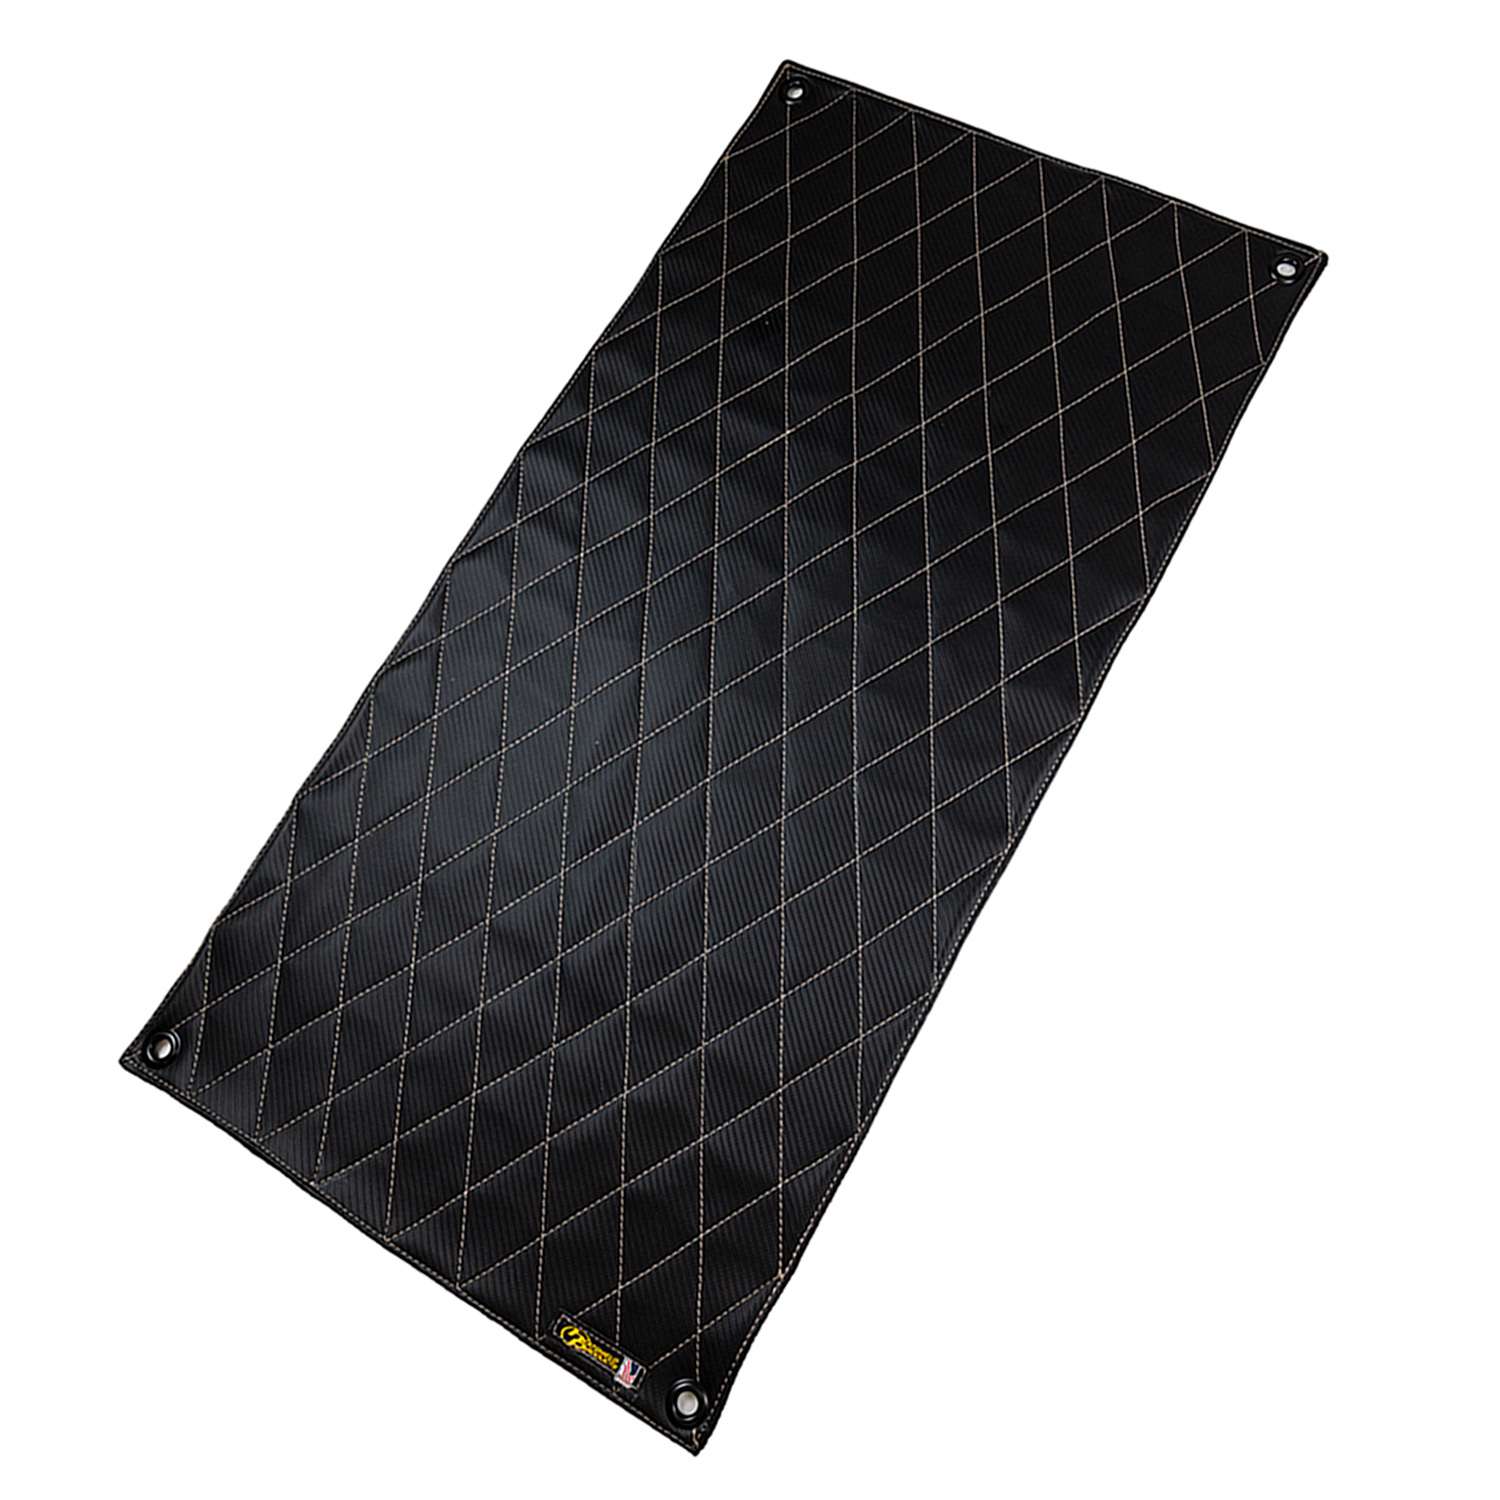 Heatshield Products 914011 - The Stealth Floor Shield is a thermal-barrier material engineered to keep drivers cooler and safer in street cars, race cars, off-road vehicles and just about any type of vehicle. Stealth Floor Shield reduces this strain 